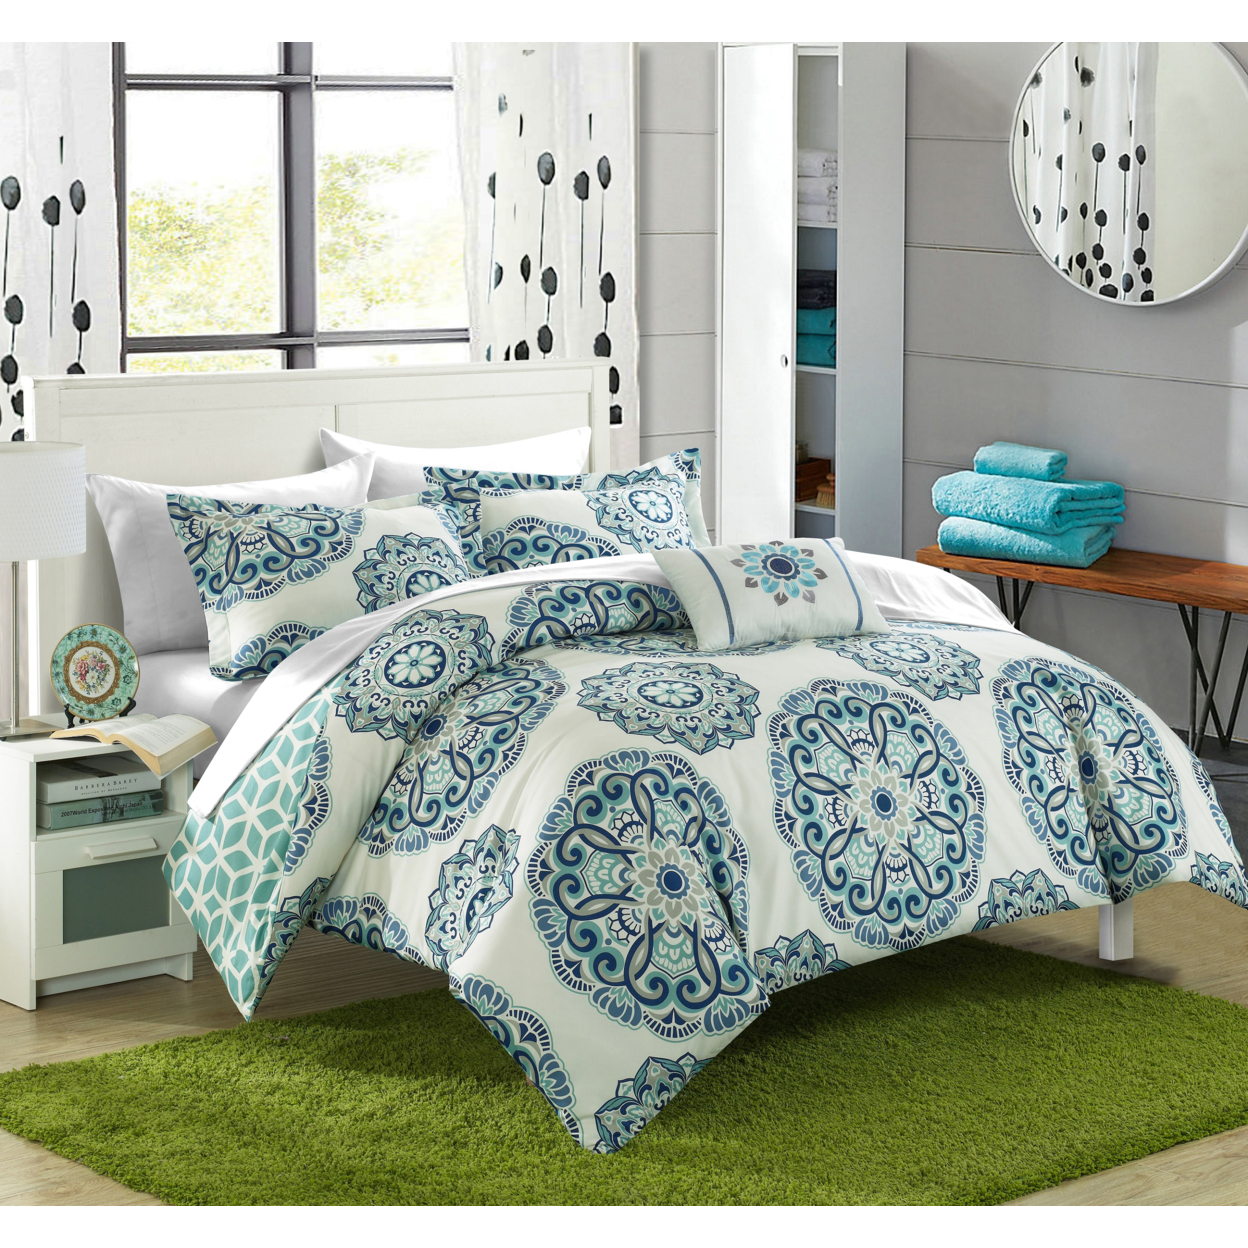 8 Or 6 Pc. Barella Super Soft Large Printed Medallion REVERSIBLE With Geometric Printed Backing Comforter Set - Green, Queen